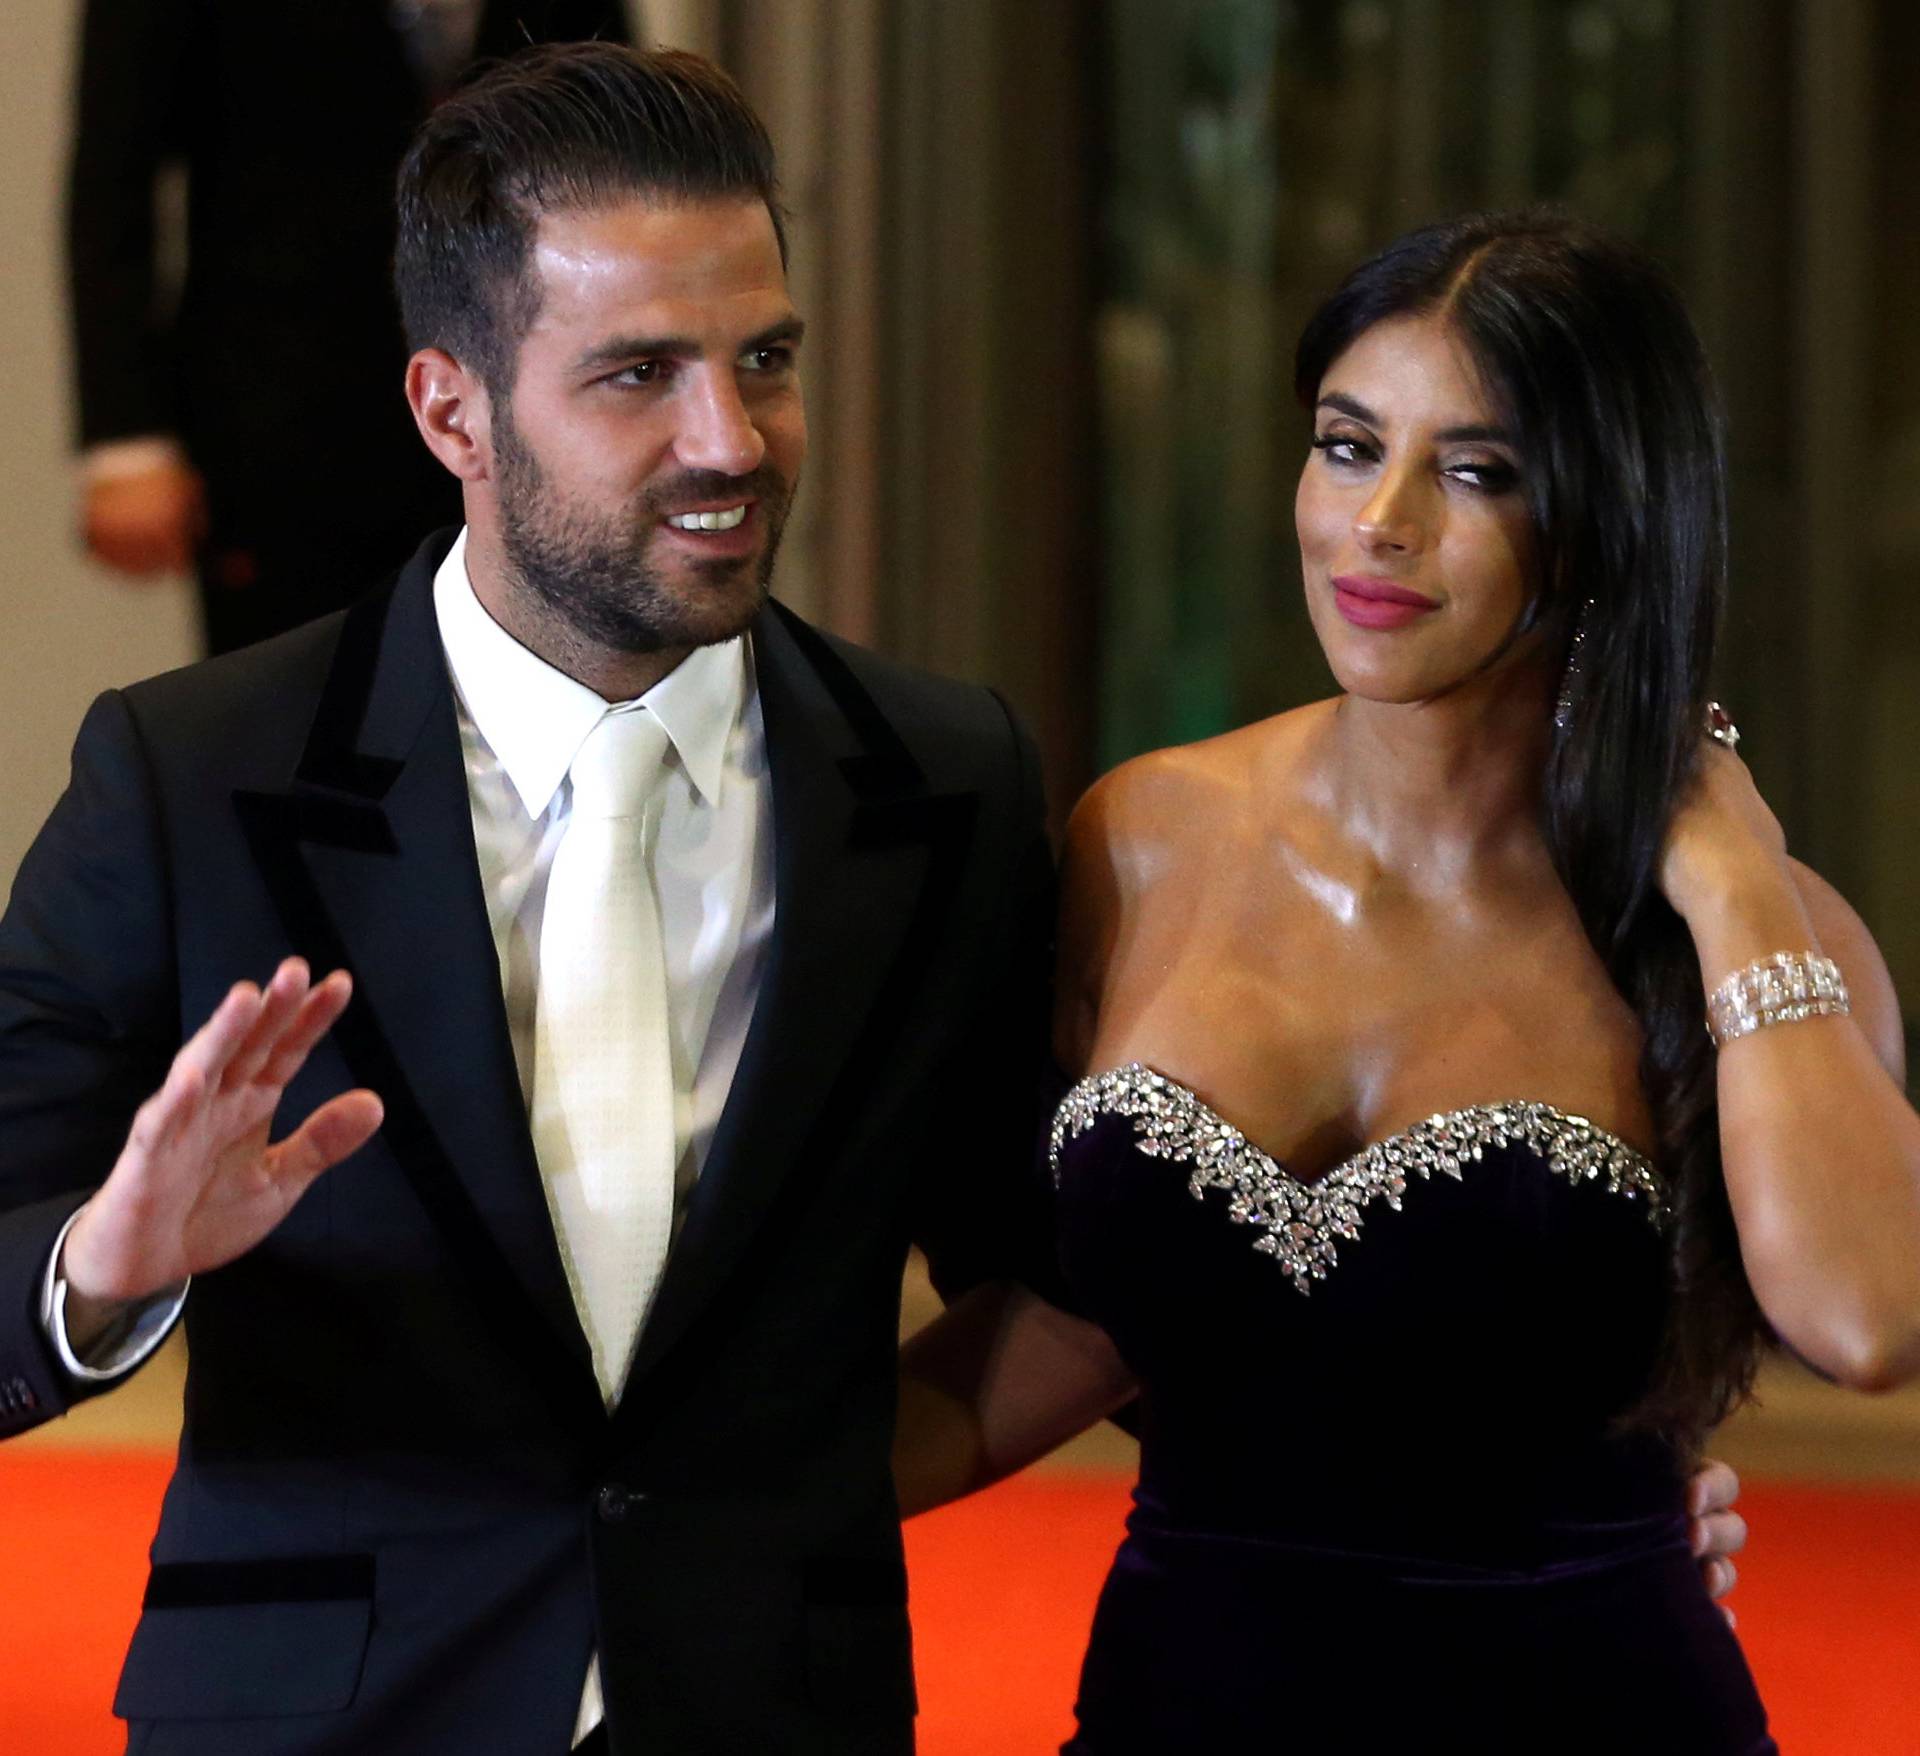 Argentine soccer player Lionel Messi's former Barcelona FC teammate Cesc Fabregas and his wife Daniella Semaan pose for photographers as they arrive to the wedding of Messi and Antonela Roccuzzo in Rosario